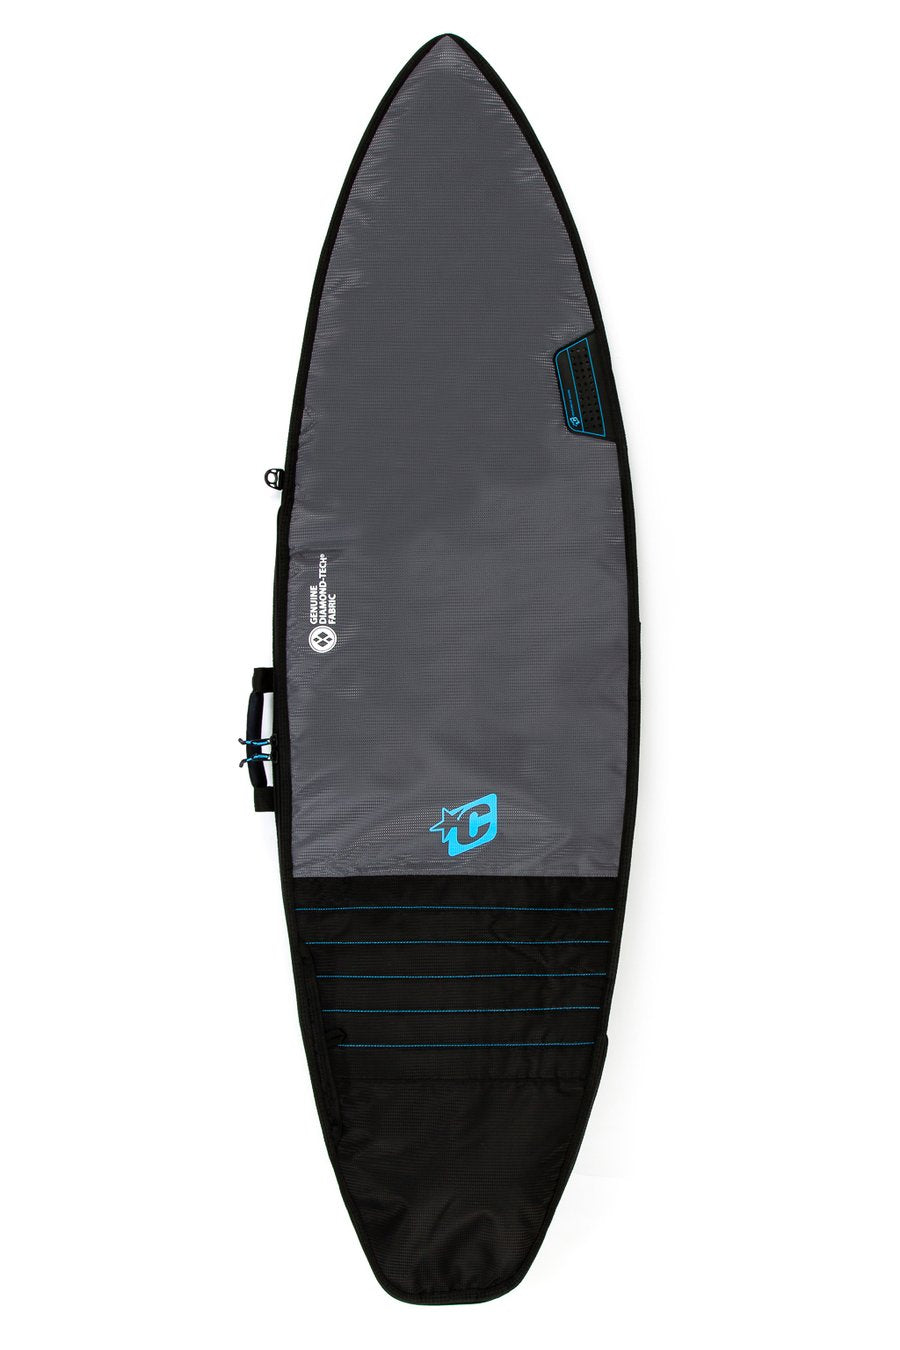 Copy of Creatures of Leisure - Shortboard Day Use: Charcoal Cyan 6'7"